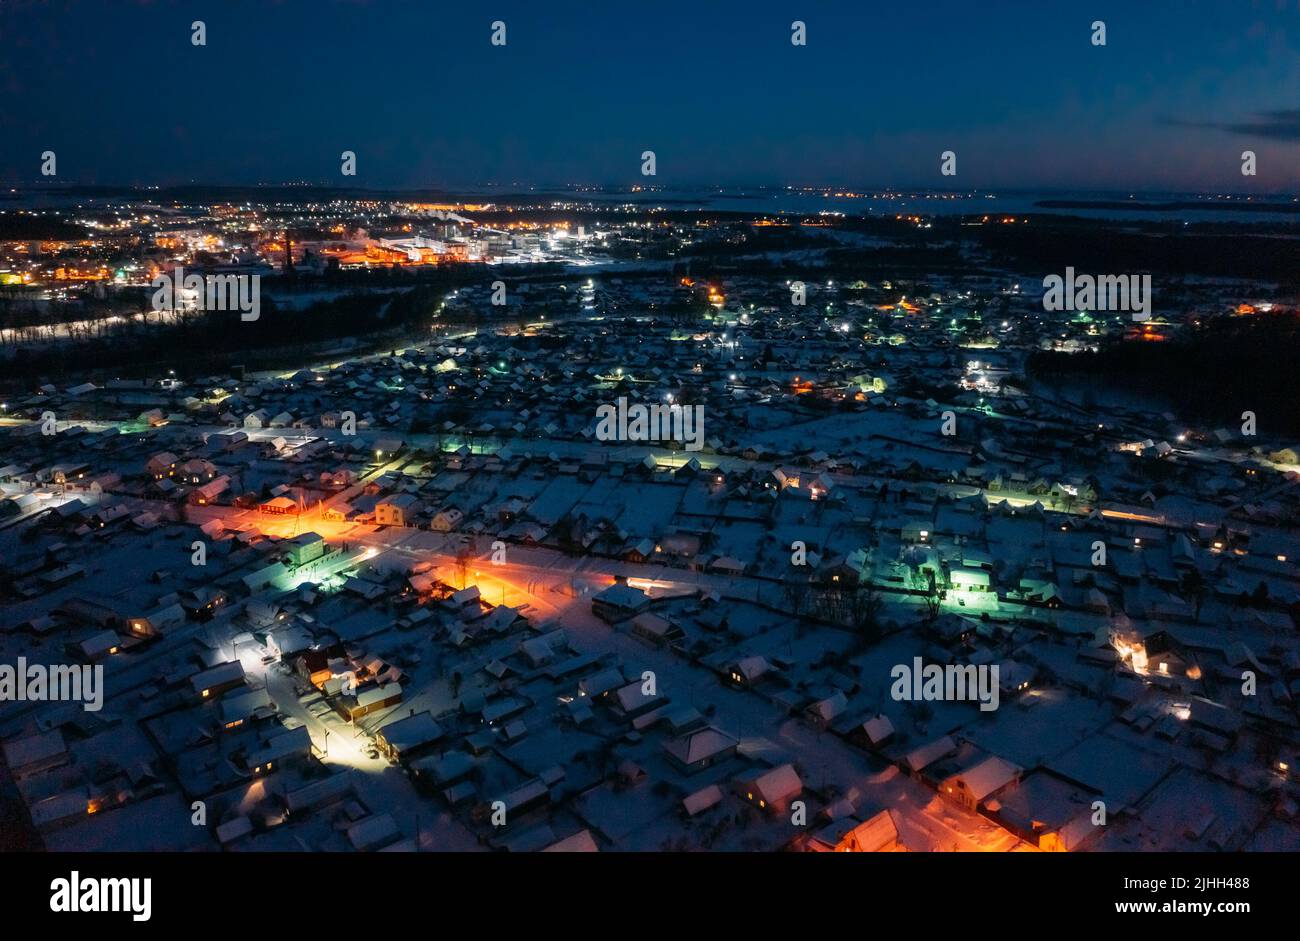 Aerial View Of Town Skyline Winter Night. Snowy Landscape Cityscape Skyline Stock Photo